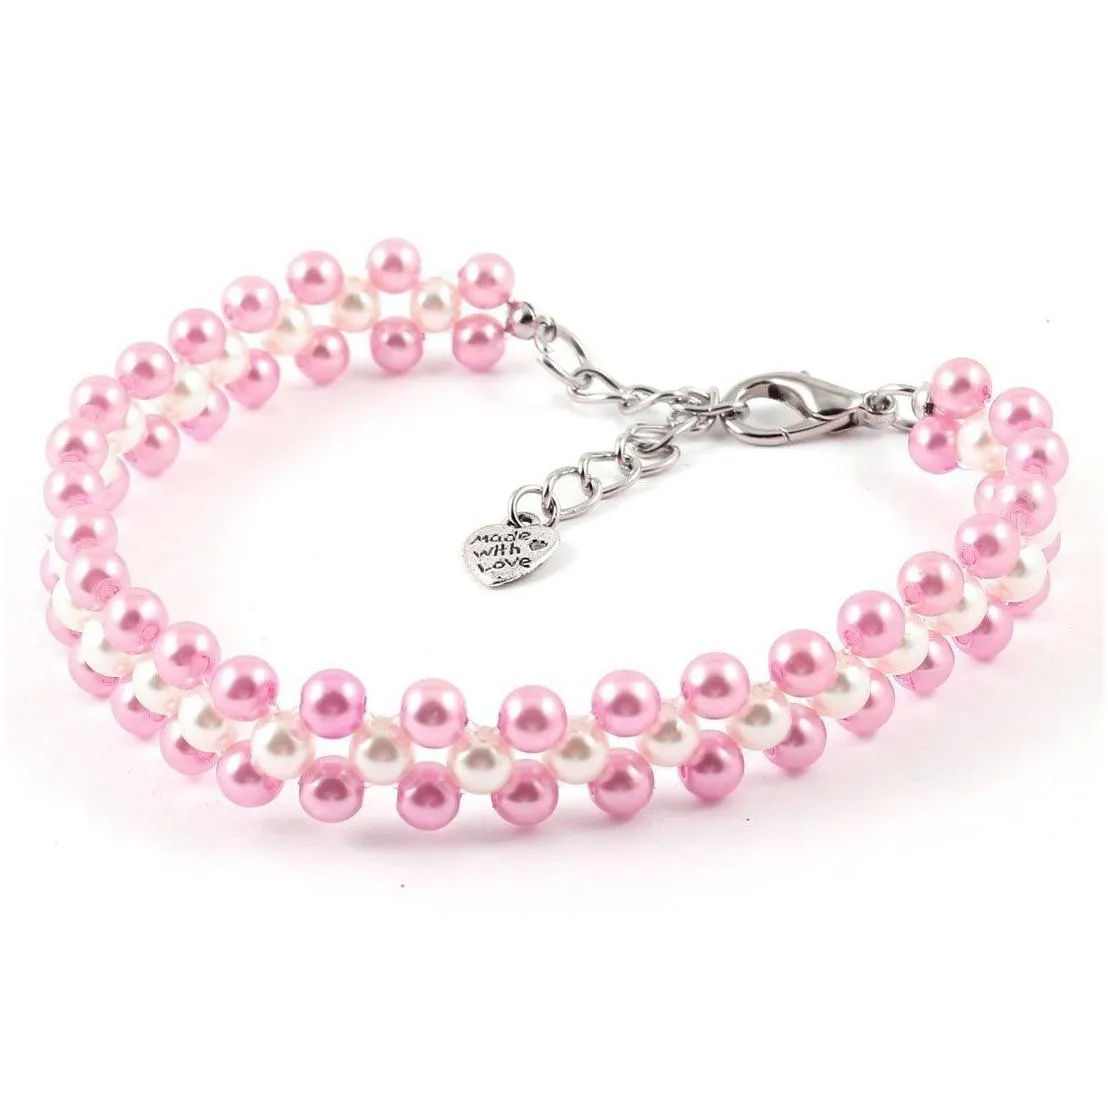 50pcs three rows pearl linked beads pet dog heart pendant puppy collar necklace ring